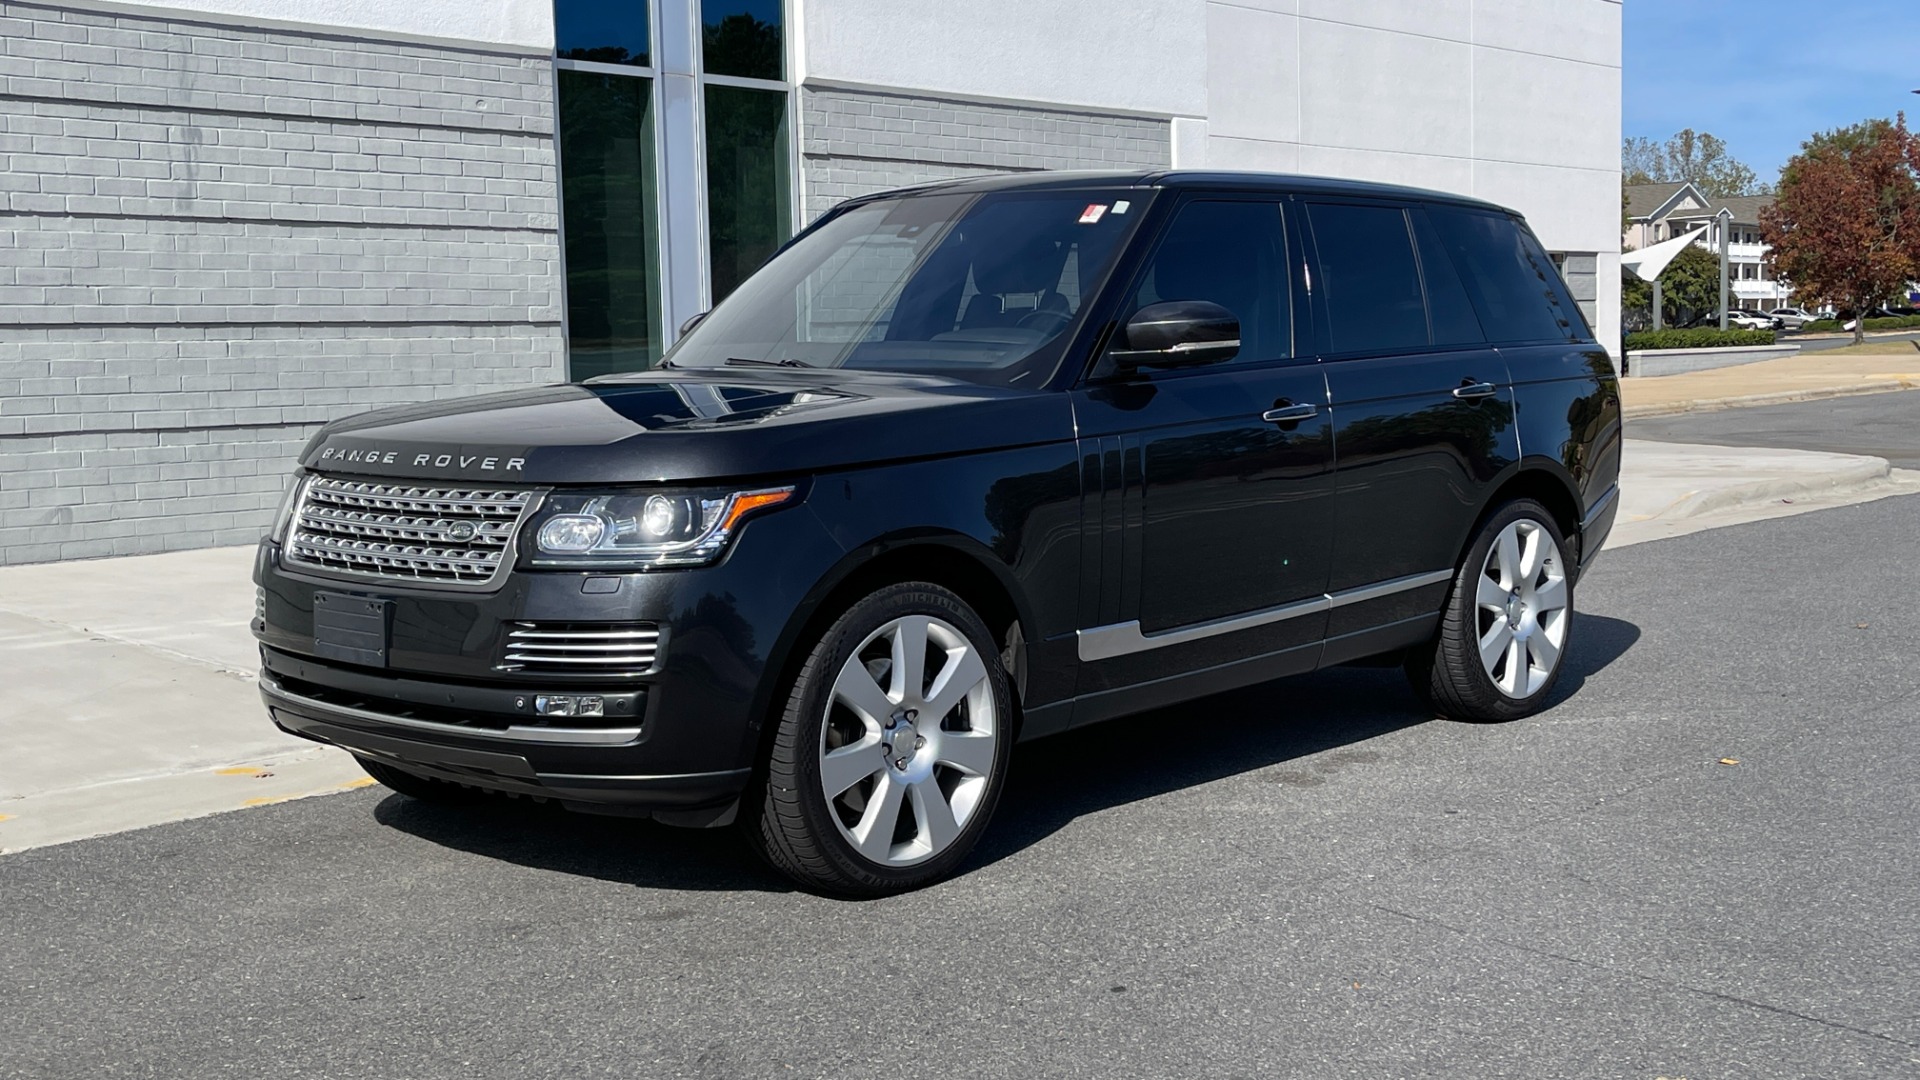 Used 2014 Land Rover Range Rover Supercharged Autobiography / 22IN WHEELS / PREMIUM PAINT / MASSAGE for sale $42,975 at Formula Imports in Charlotte NC 28227 3